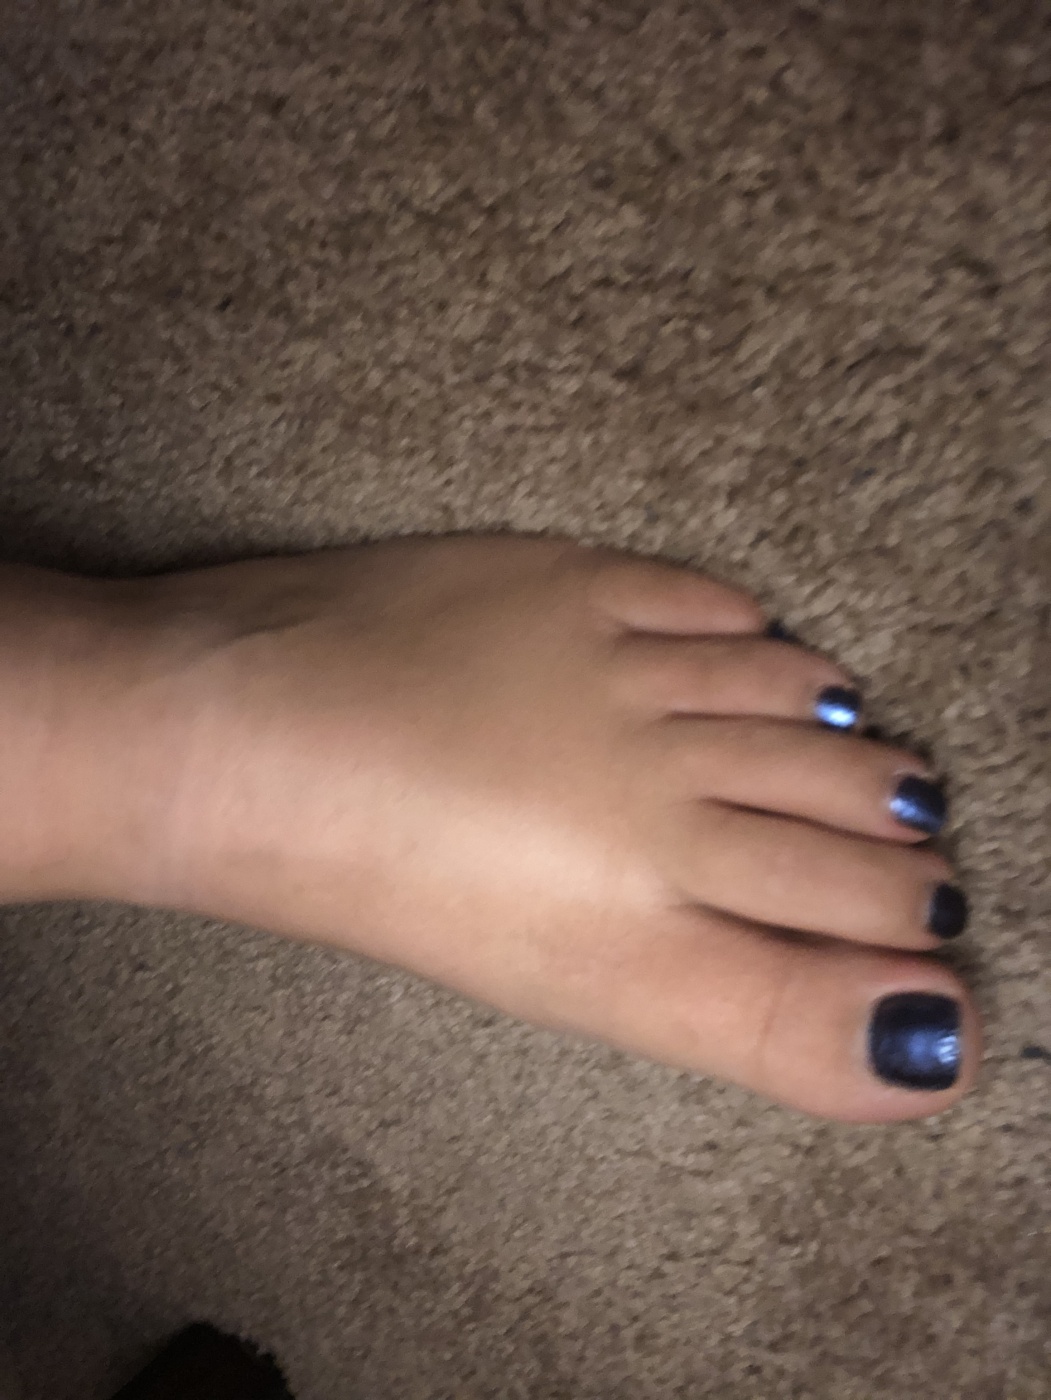 Feet pictures, no questions aske…